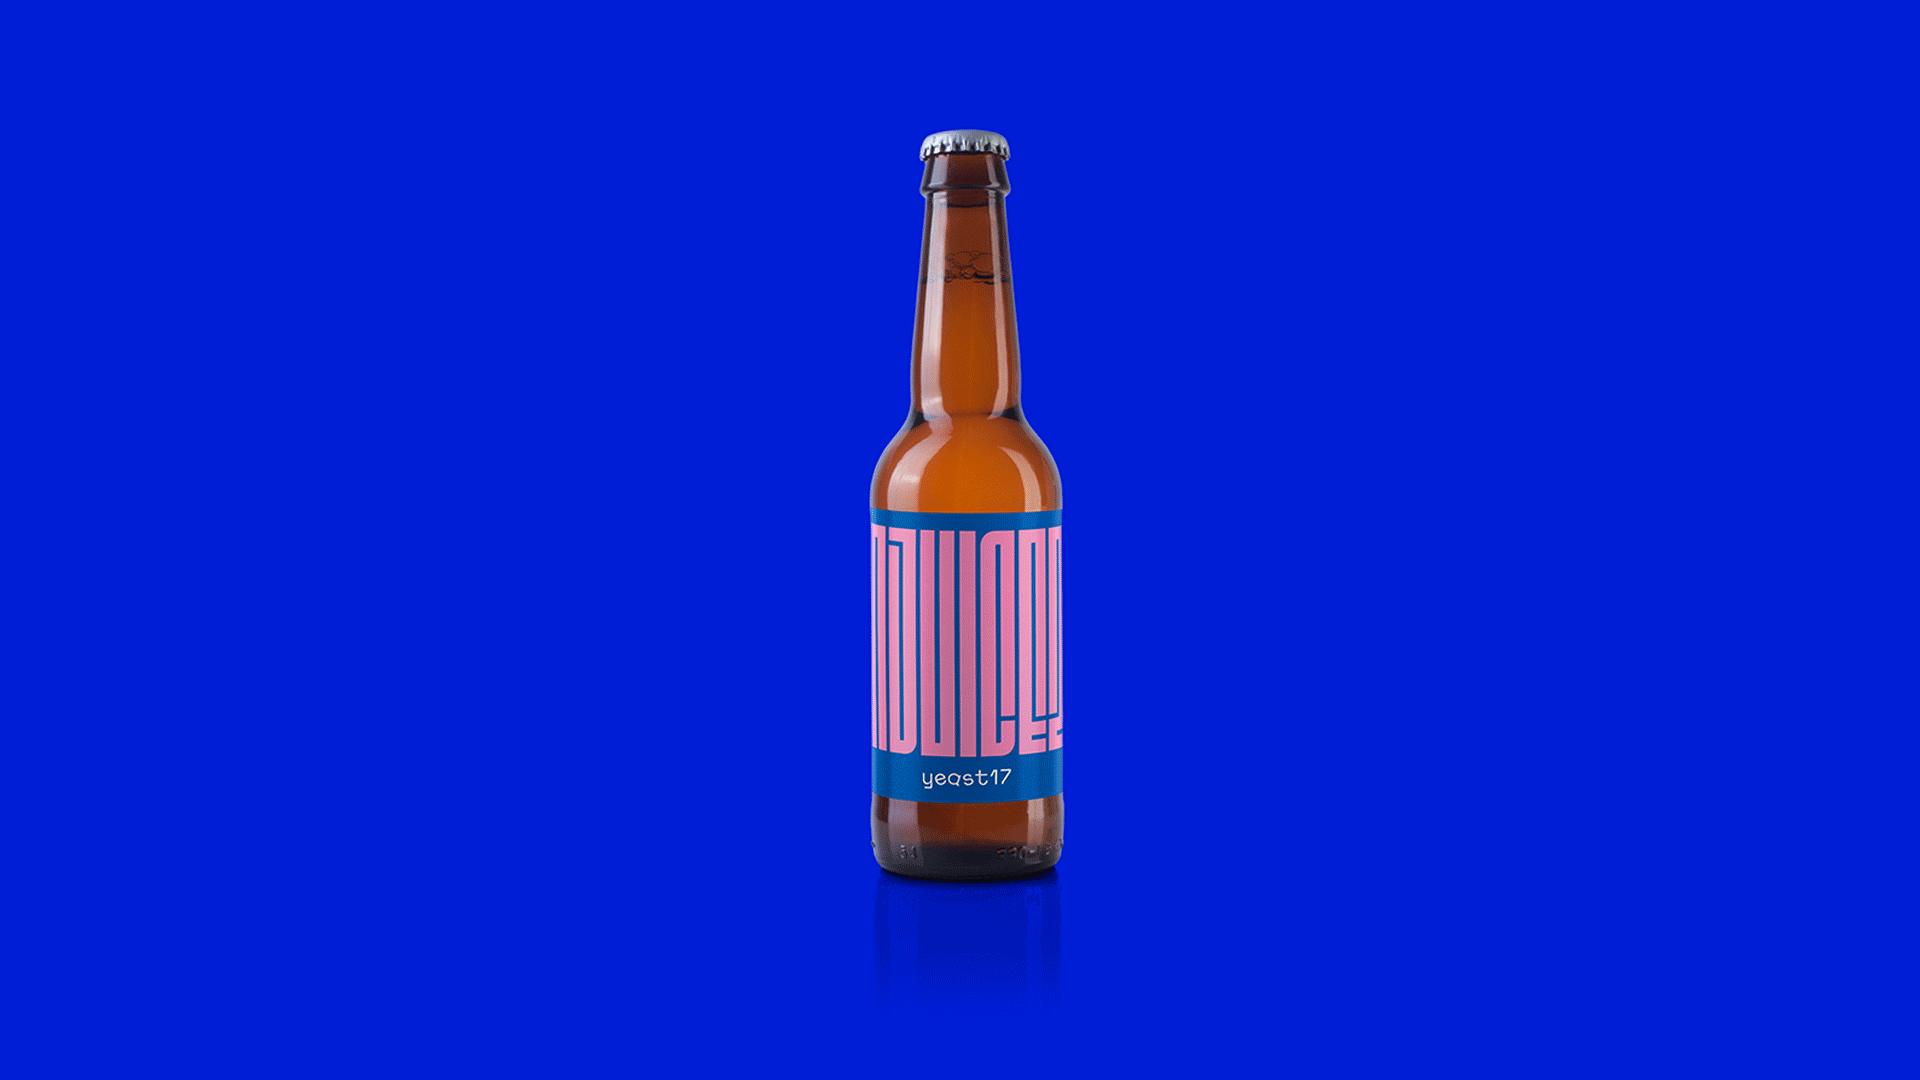 Featured image for This Playful Beer Features Colorful Labels With Extended Typography